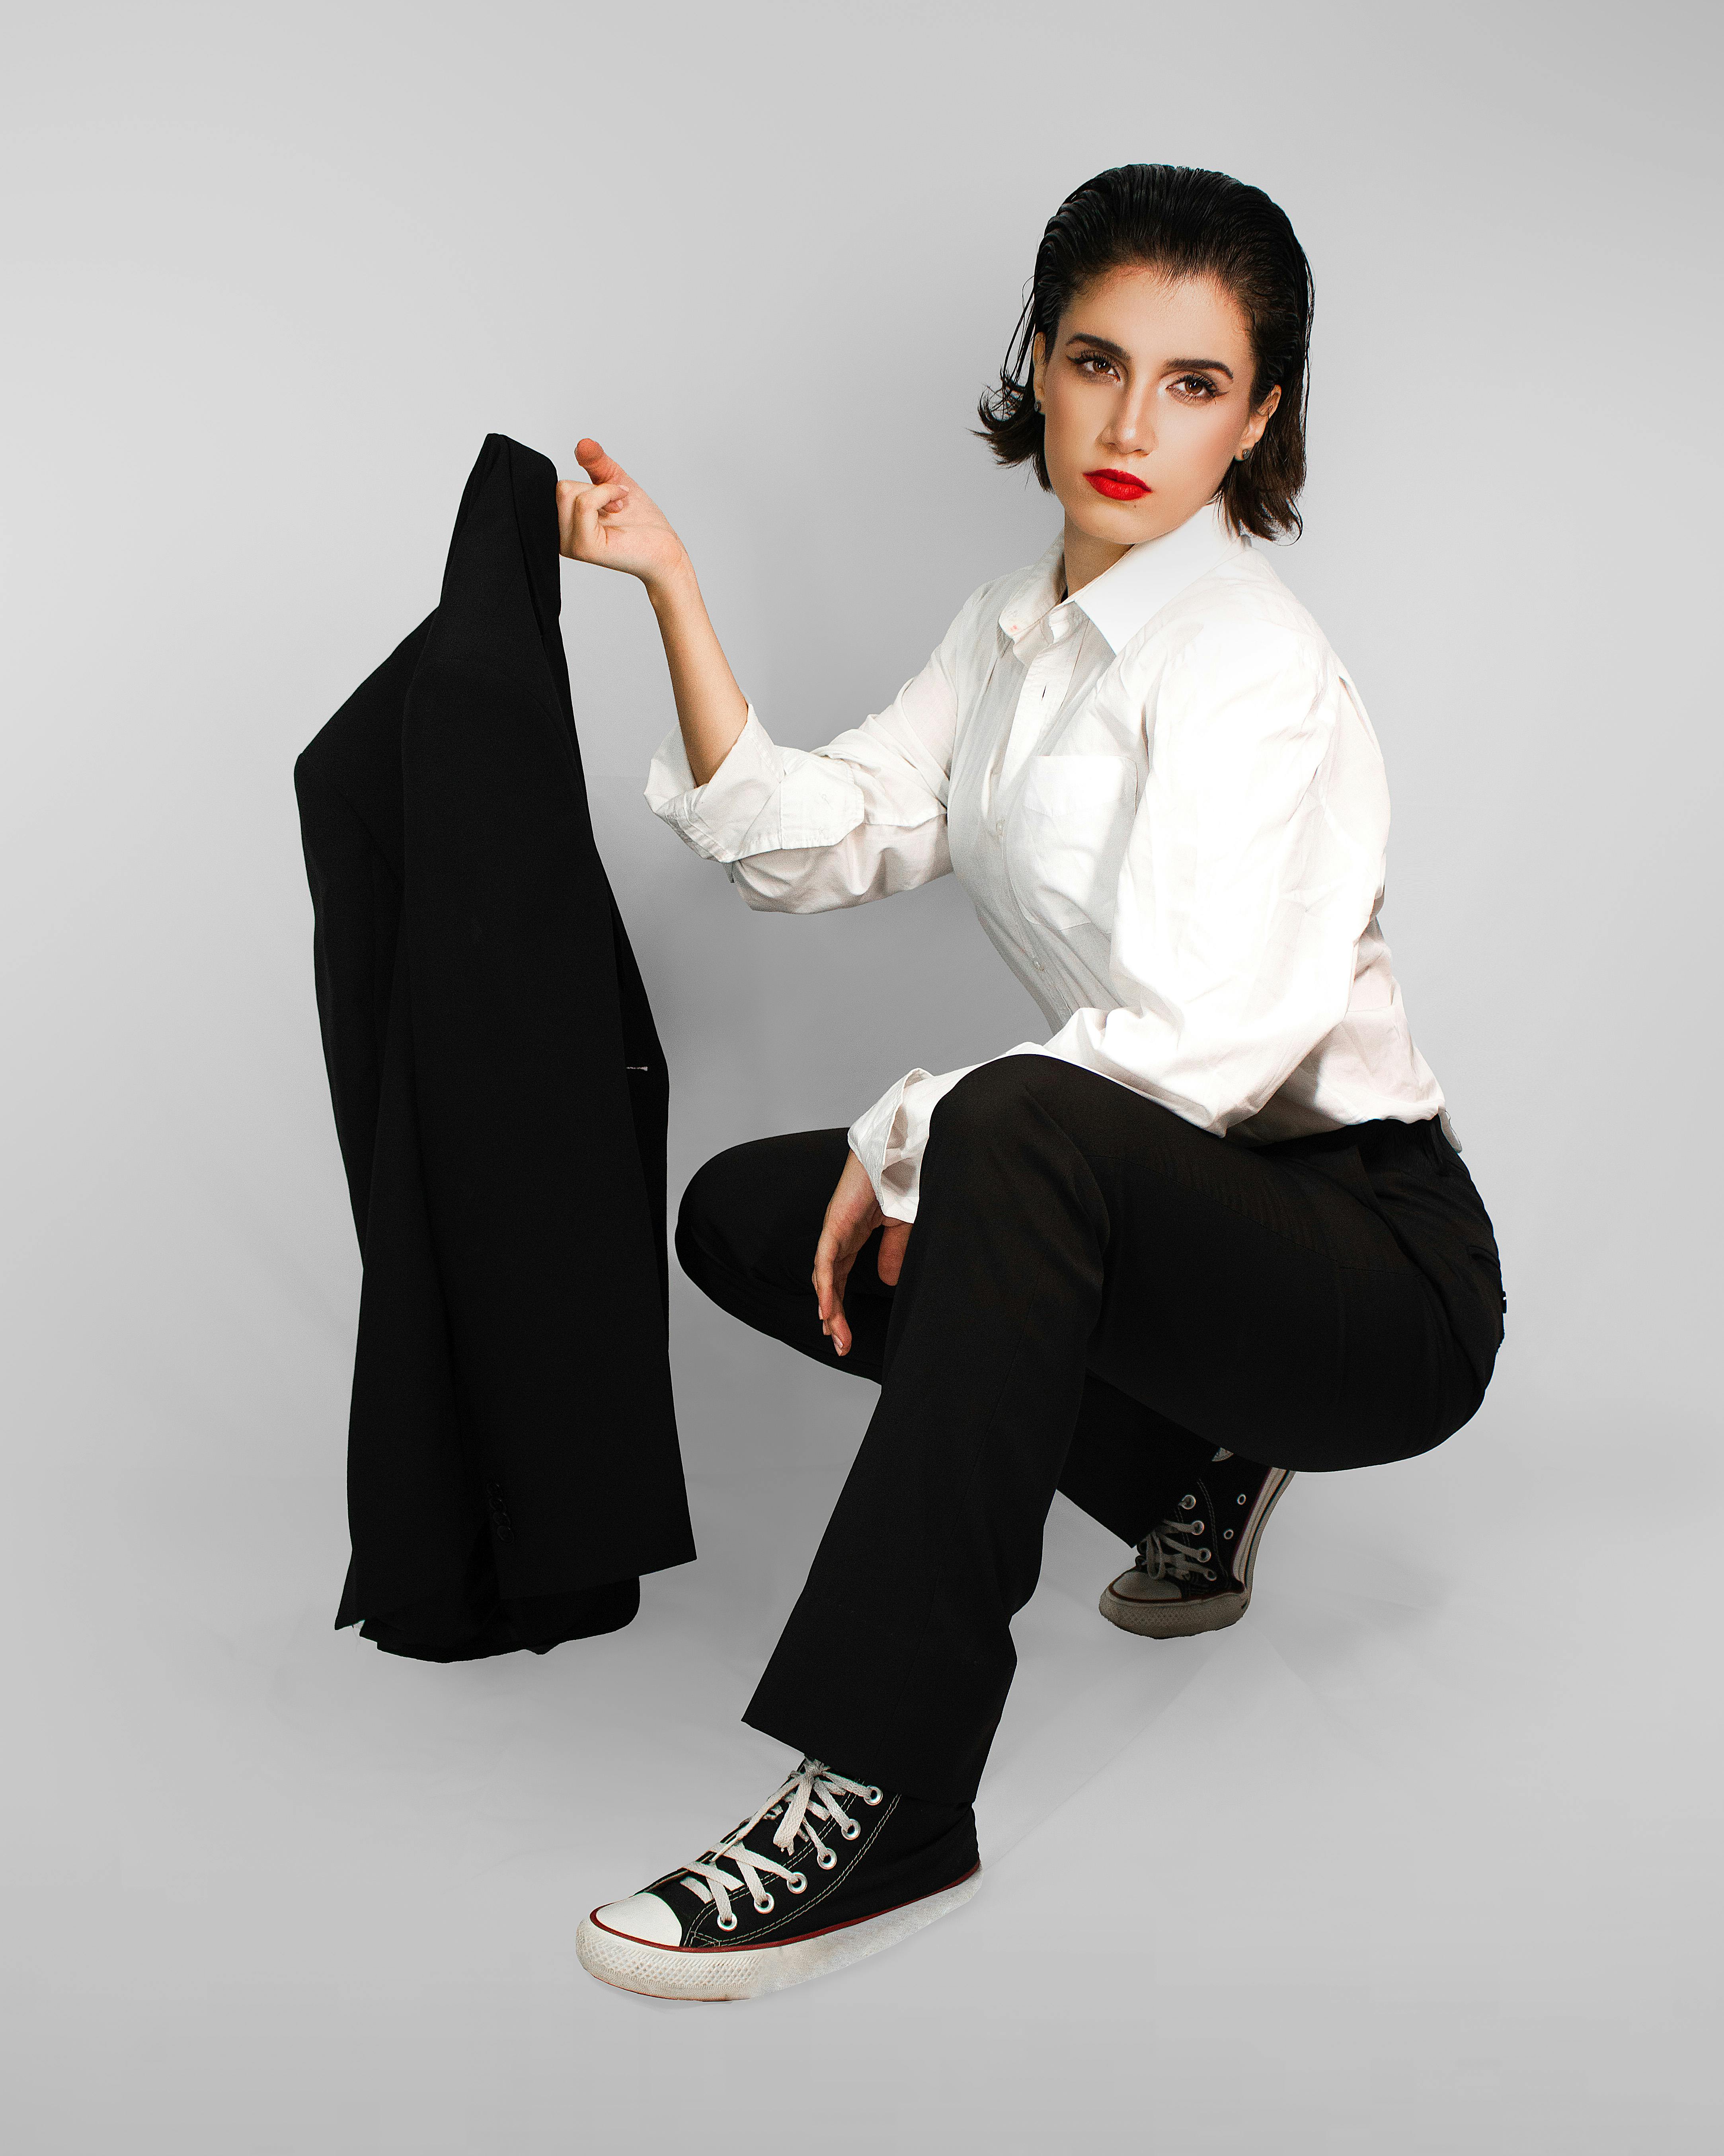 Premium Photo | Woman wearing a white blazer and black pants standing in  front of a wooden wall